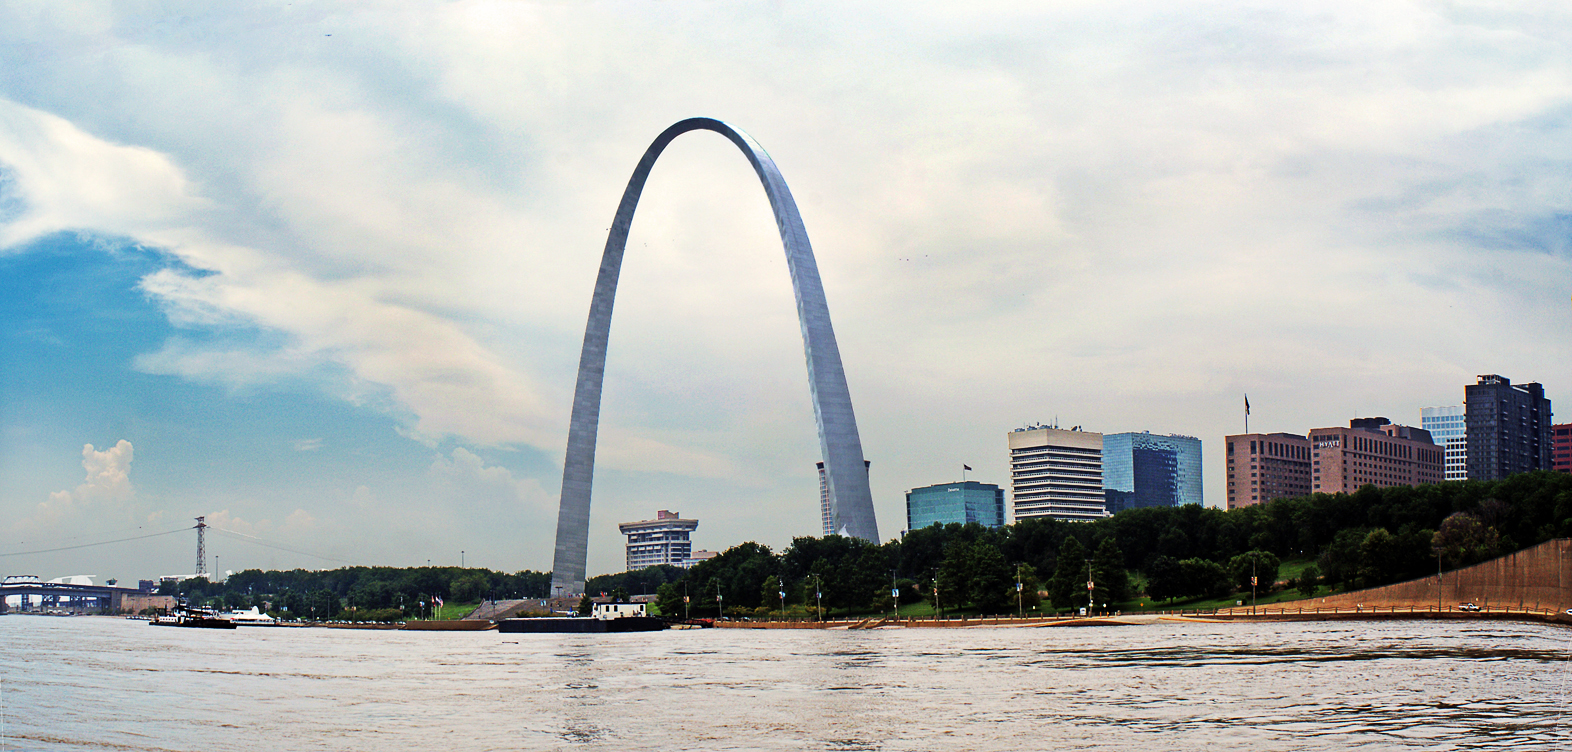 More Than A Thousand Words: St. Louis Arch